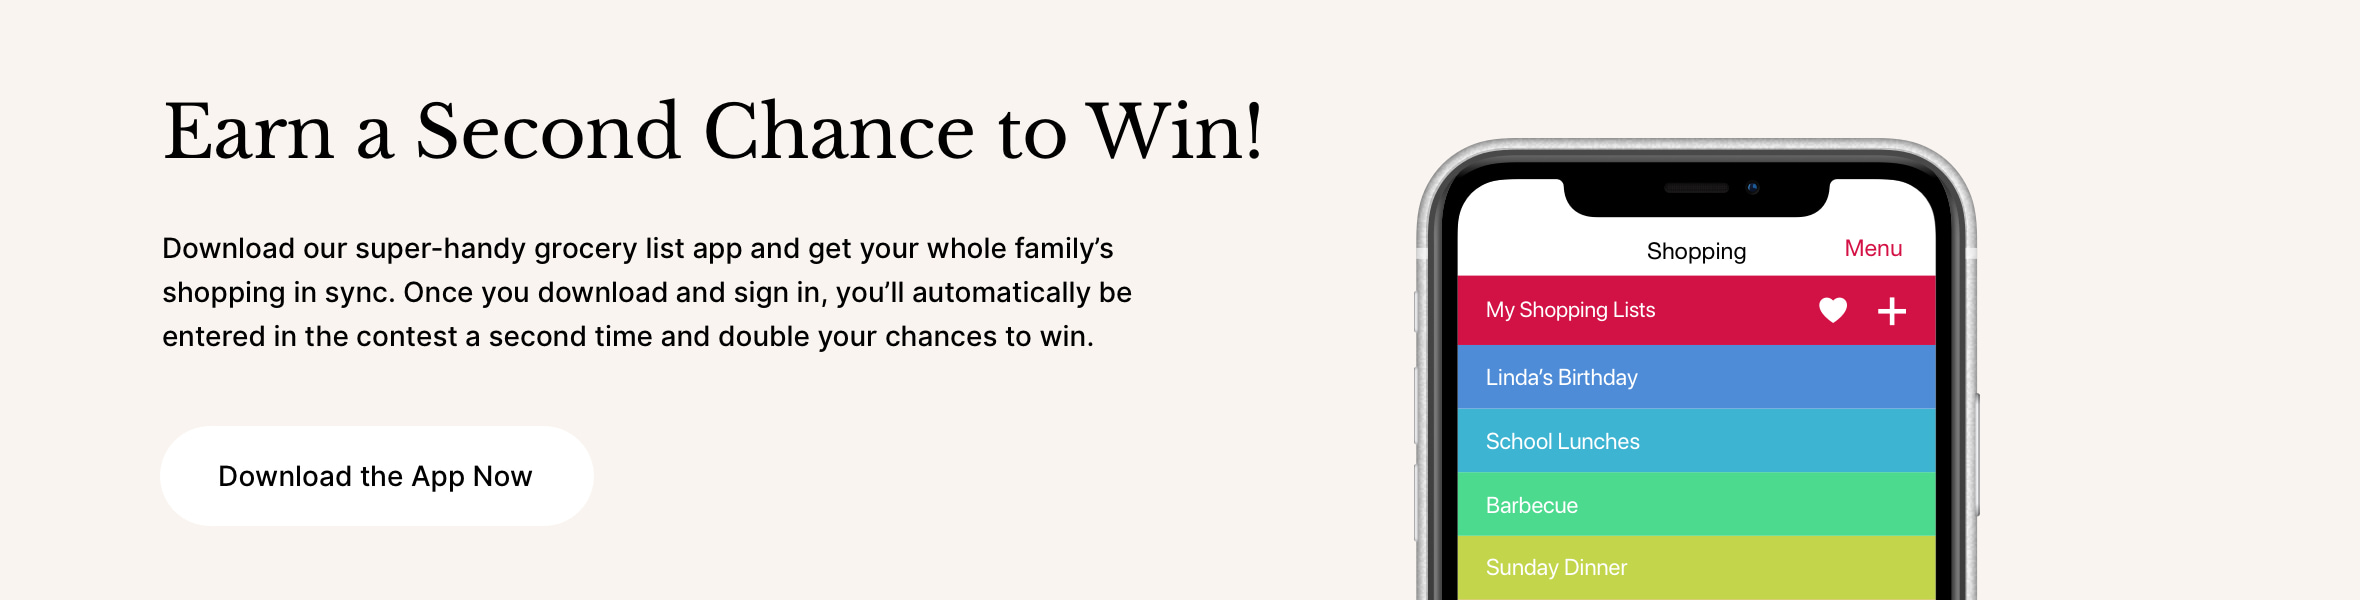 Earn a second chance to win!